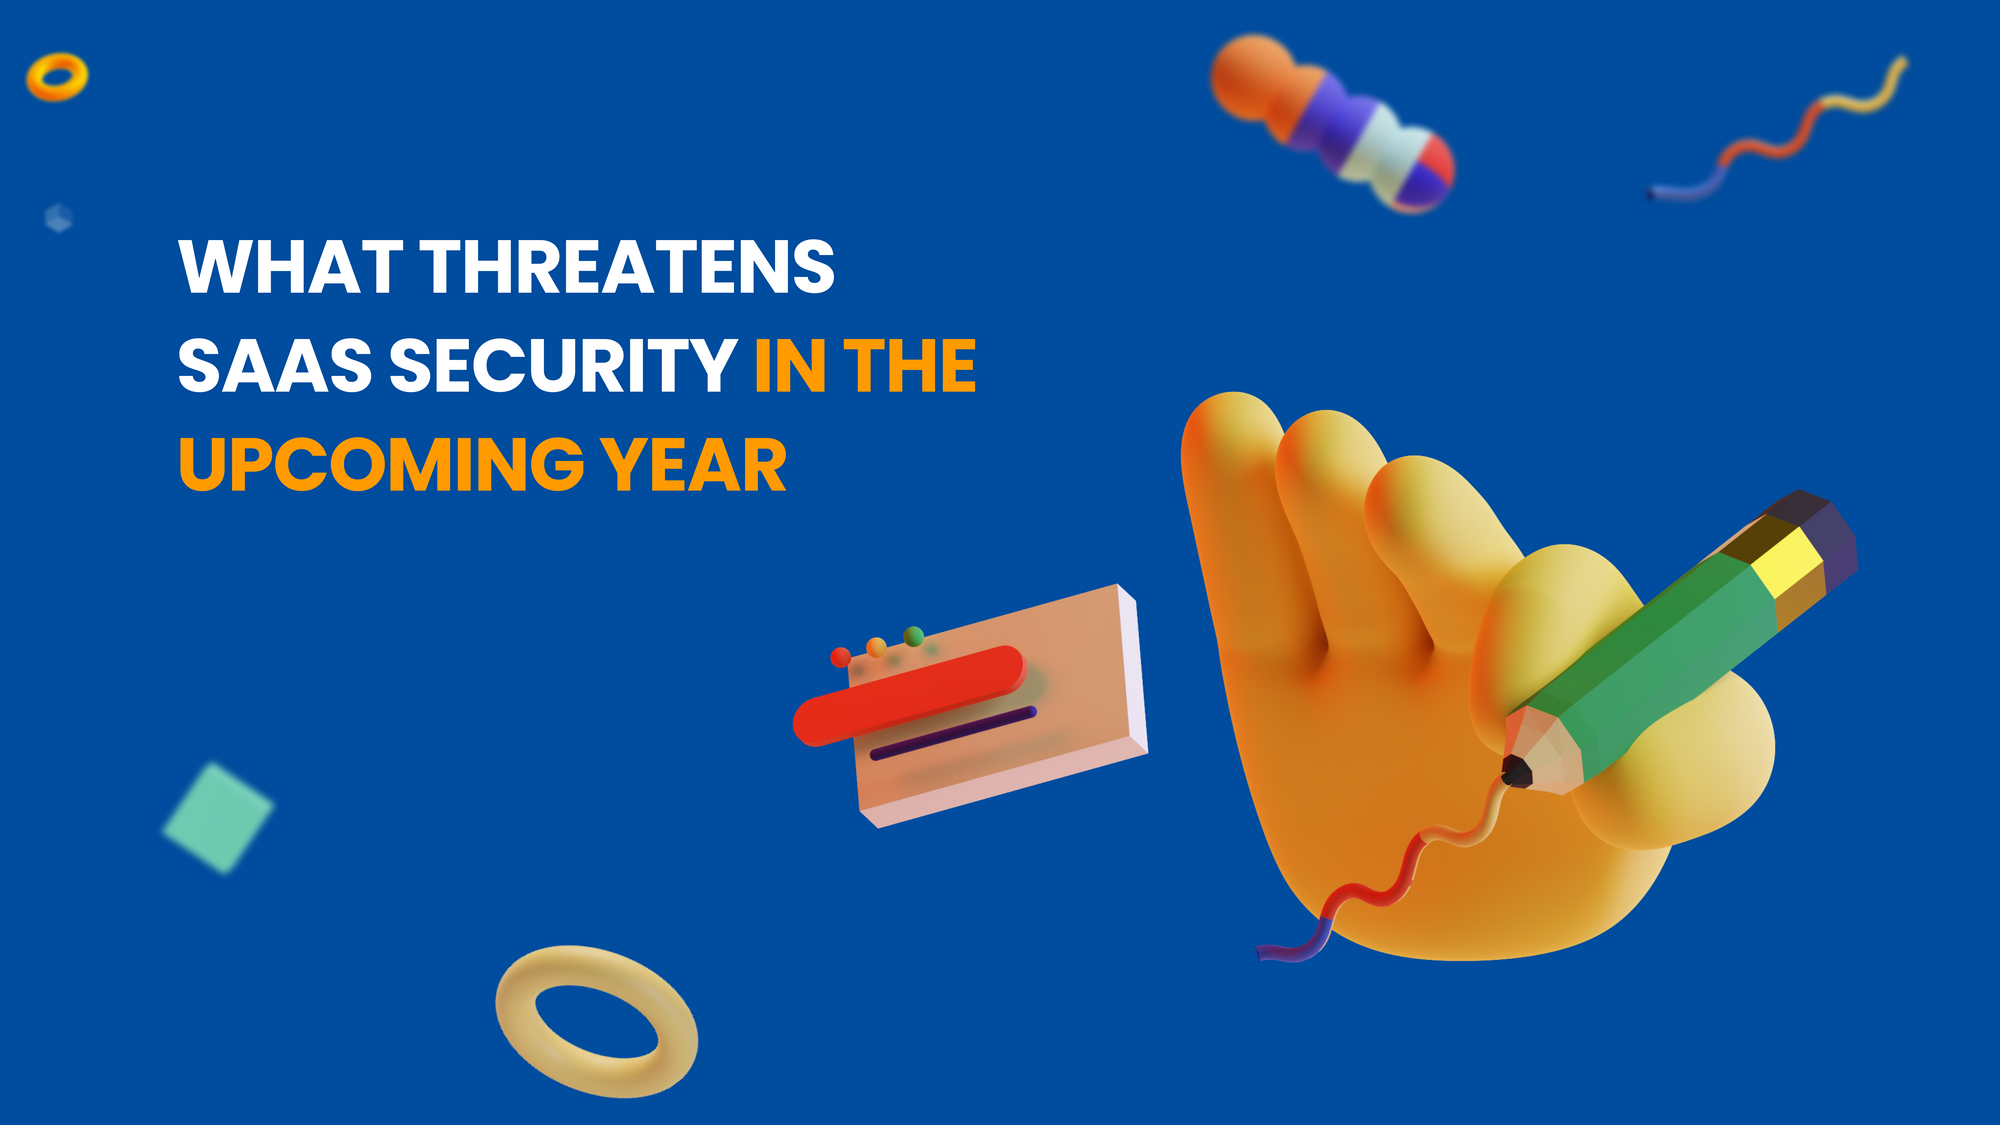 What threatens SaaS security in the upcoming year